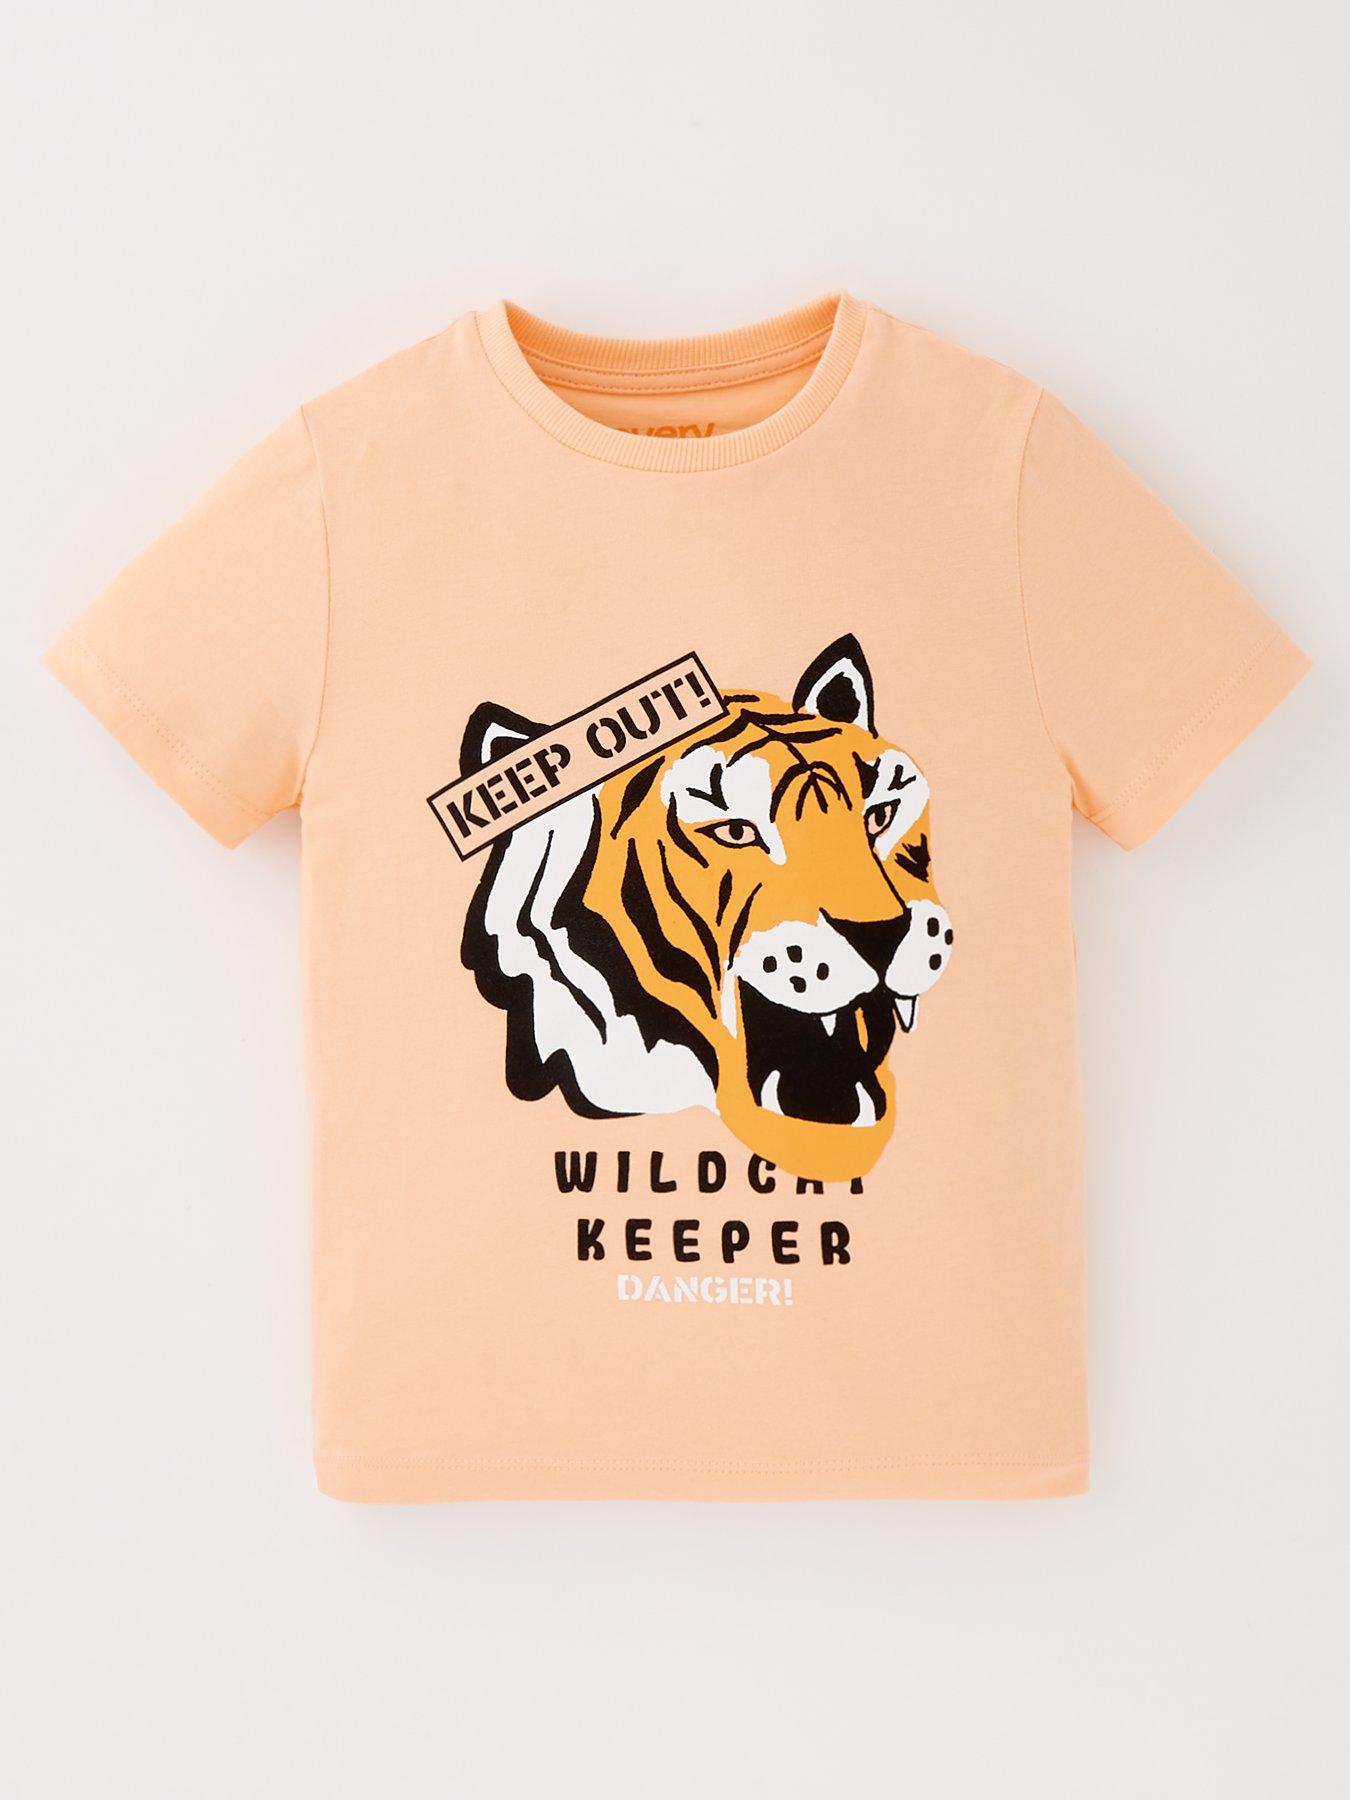 T-Shirts, T-shirts & polos, Boys clothes, Child & baby